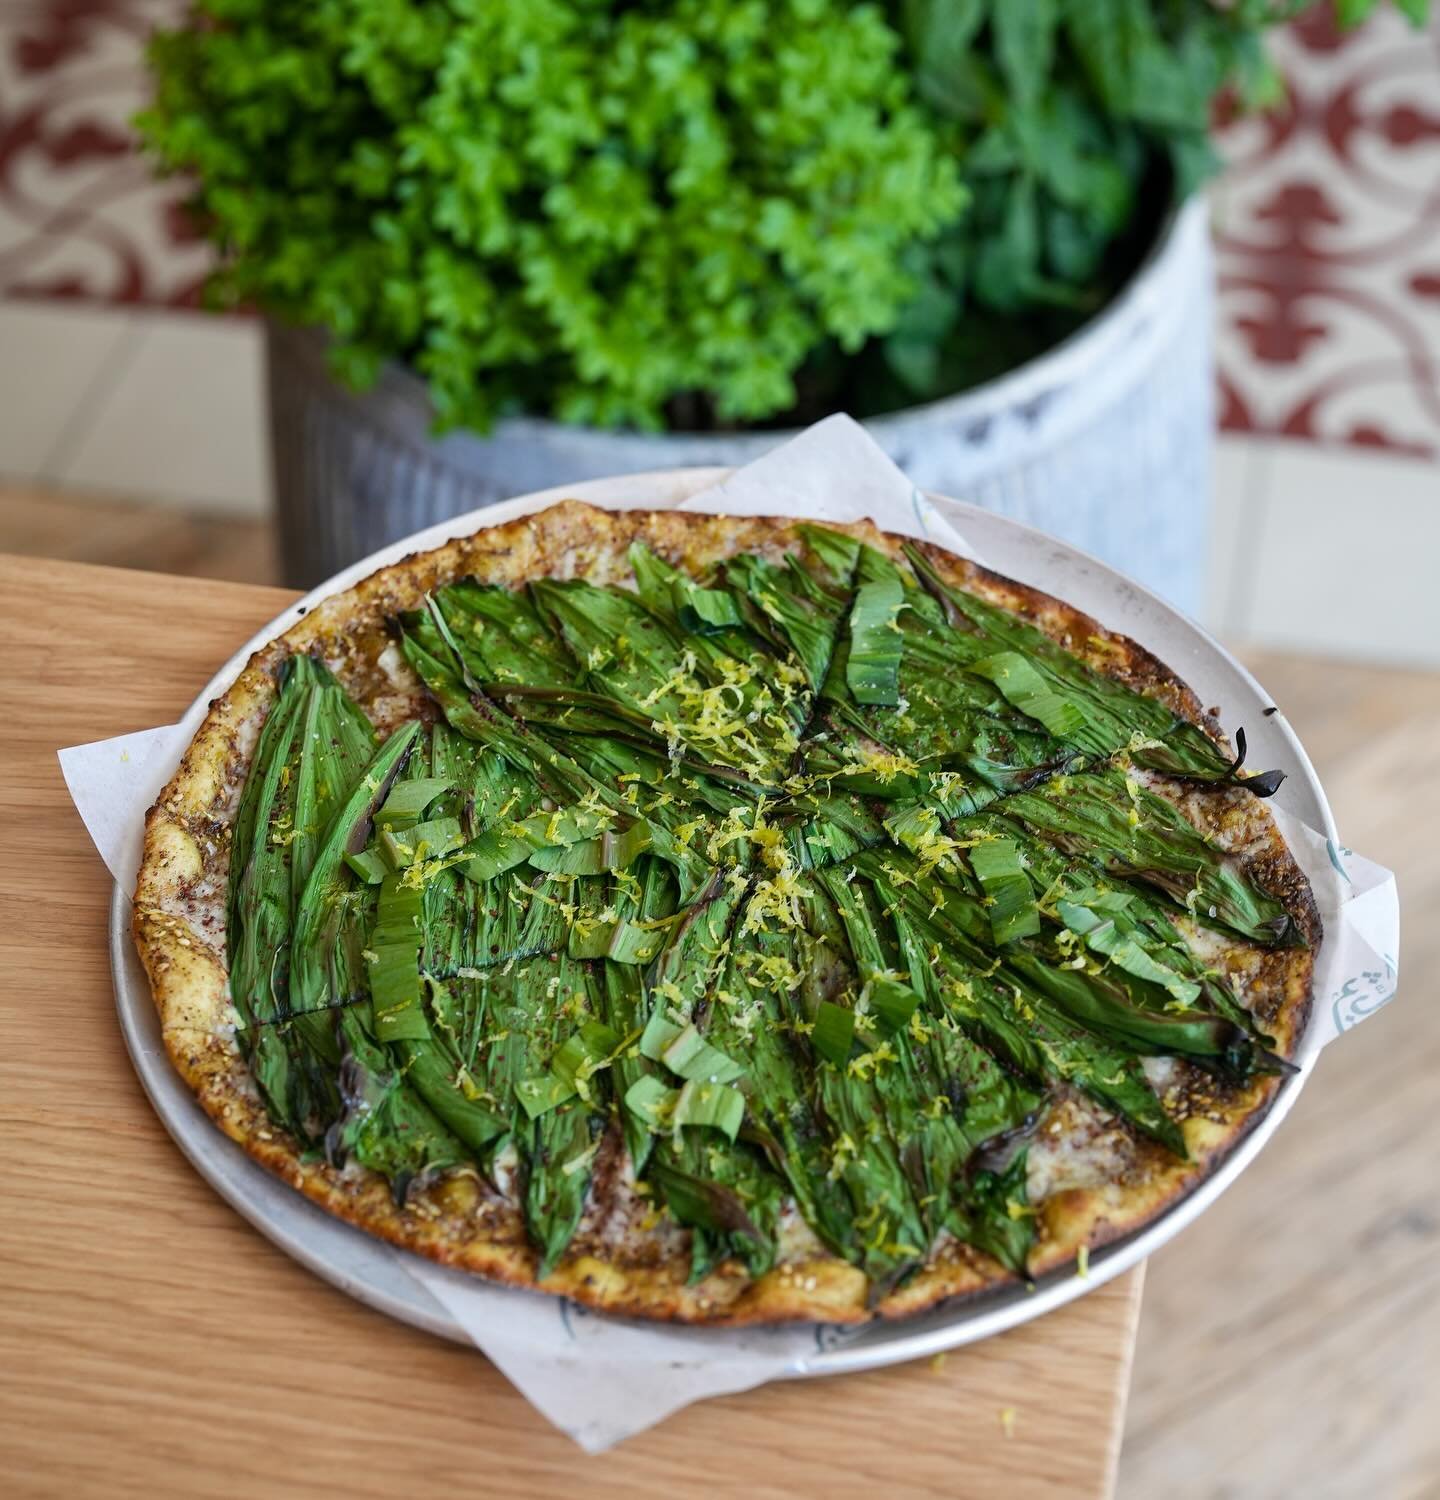 RAMPS!! New, and available for a *very* limited time is our Ramp Man&rsquo;oushe, available on both our lunch AND dinner menus! This Lebanese flatbread includes ramps, za&rsquo;atar, mozzarella, garlic, sumac, and lemon.